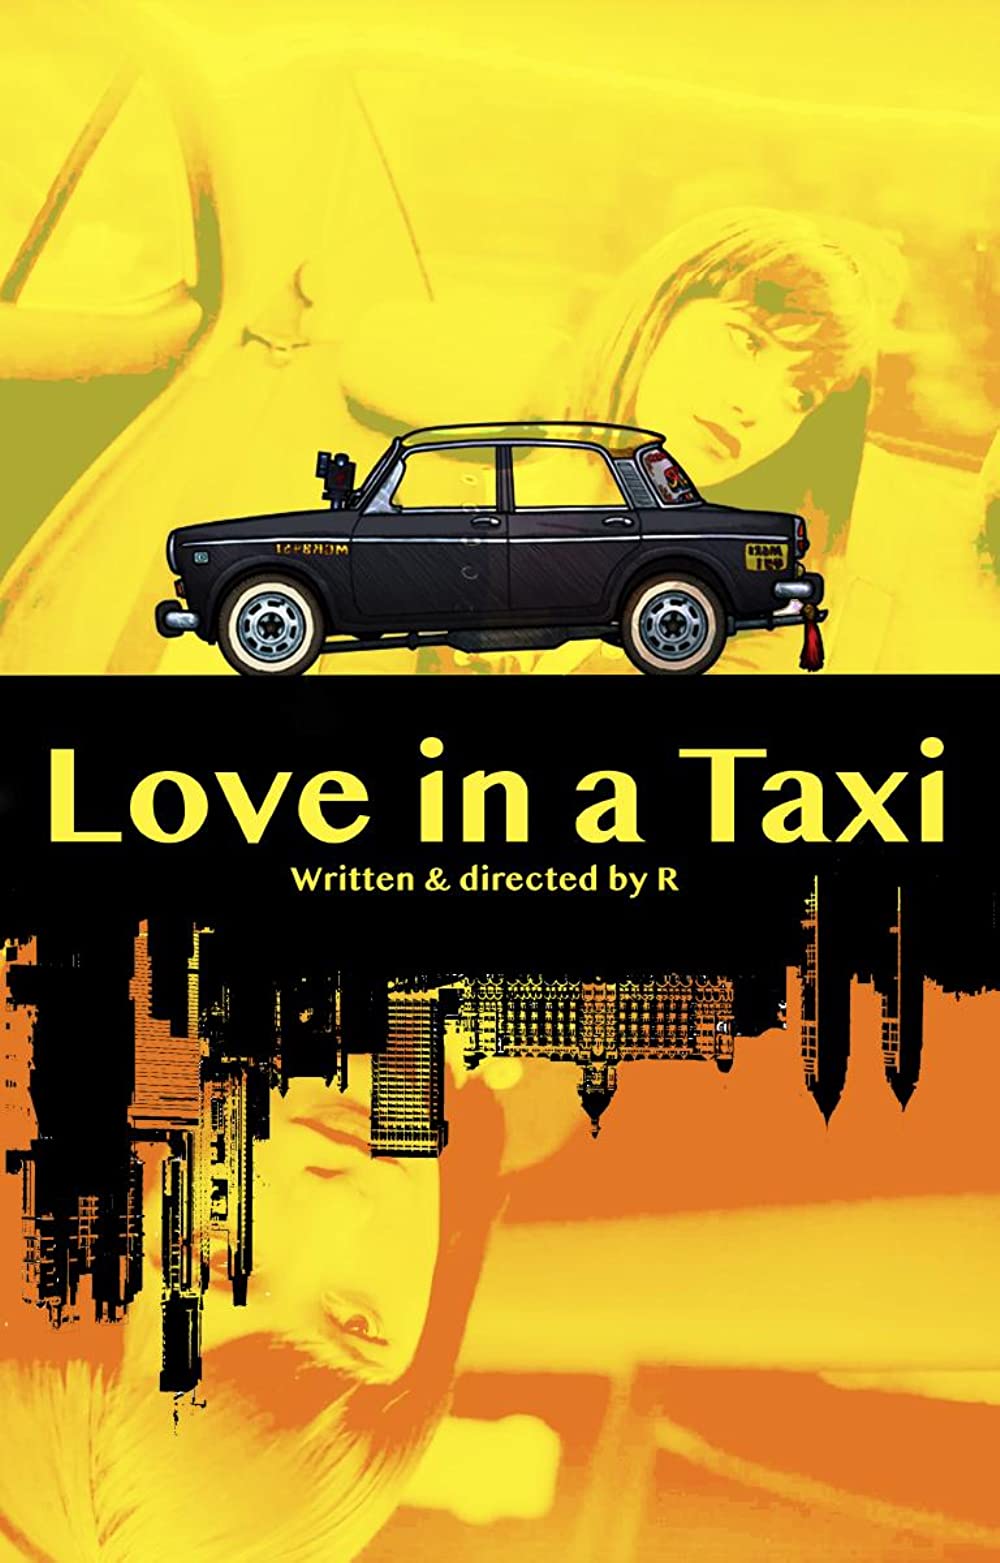 Two cab drivers, a female driver on an airport taxi and a male driver on a 'black and yellow' taxi for the poor confronts two strange passengers on their nutty shifts. The promiscuous male passenger has all confidence to hit on the young and beautiful female driver. He recites poetry, he comments on the millennials and their music tastes and what not to get the attent...